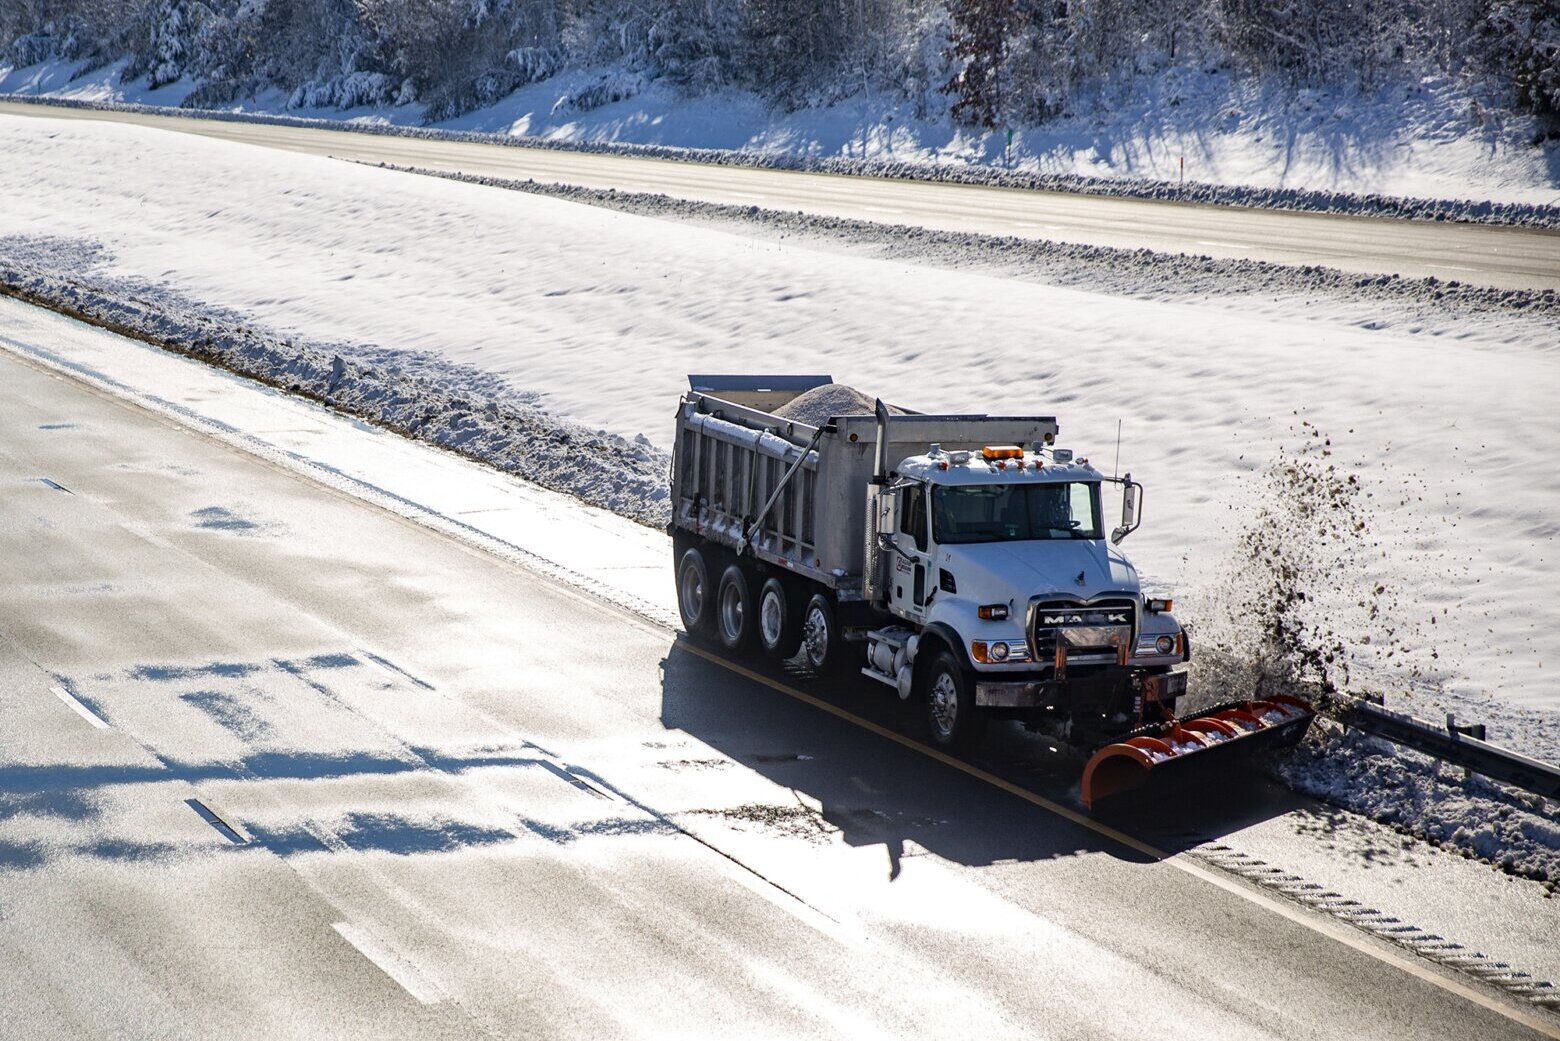 VDOT to begin pretreatment of I-95 Thursday ahead of winter weather